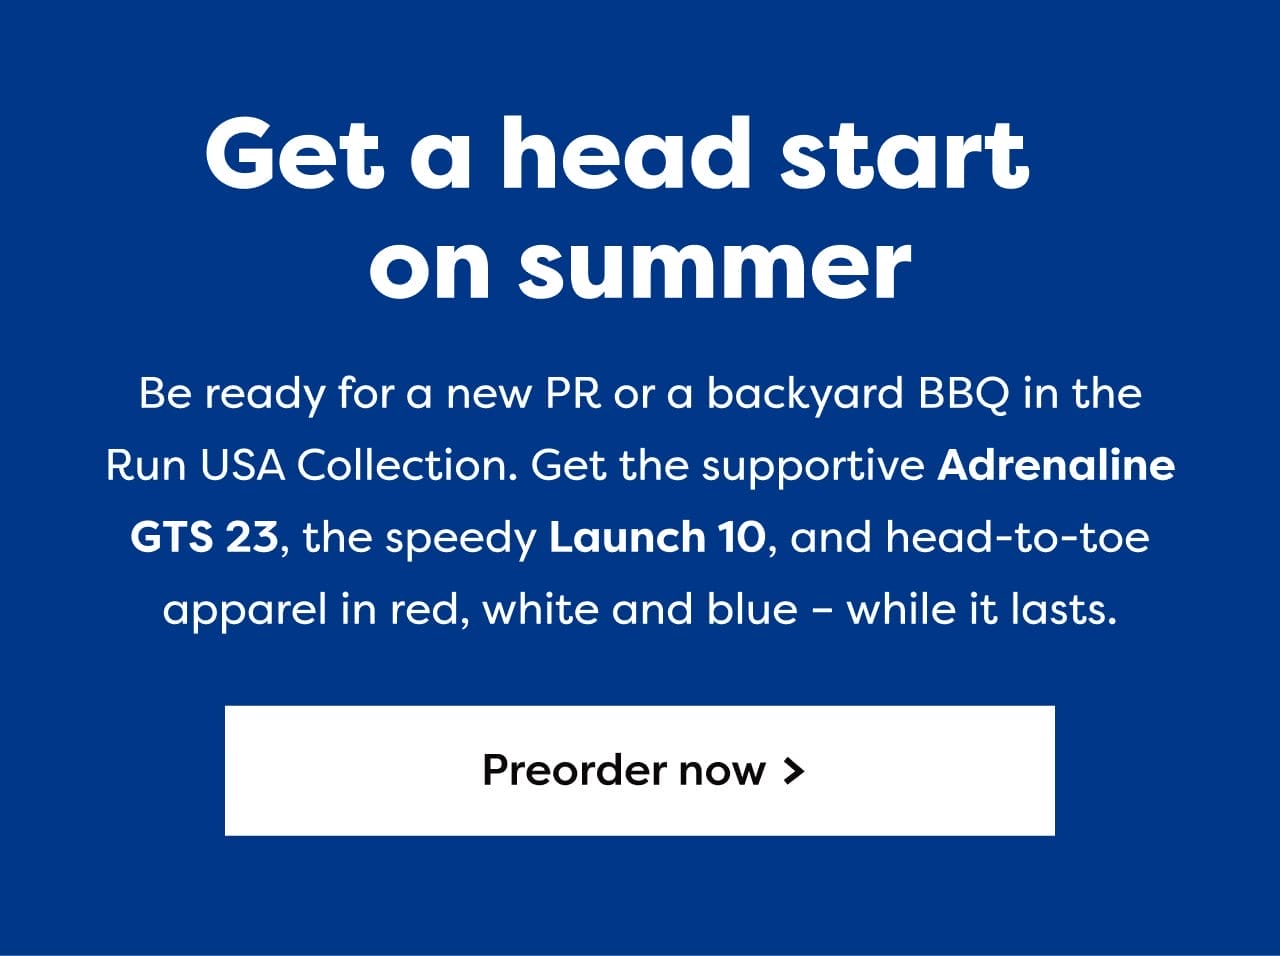 Get a head start on summer | Be ready for a new PR or a backyard BBQ in the Run USA Collection. Get the supportive Adrenaline GTS 23, the speedy Launch 10, and head-to-toe apparel in red, white and blue - while it lasts. | Preorder now >